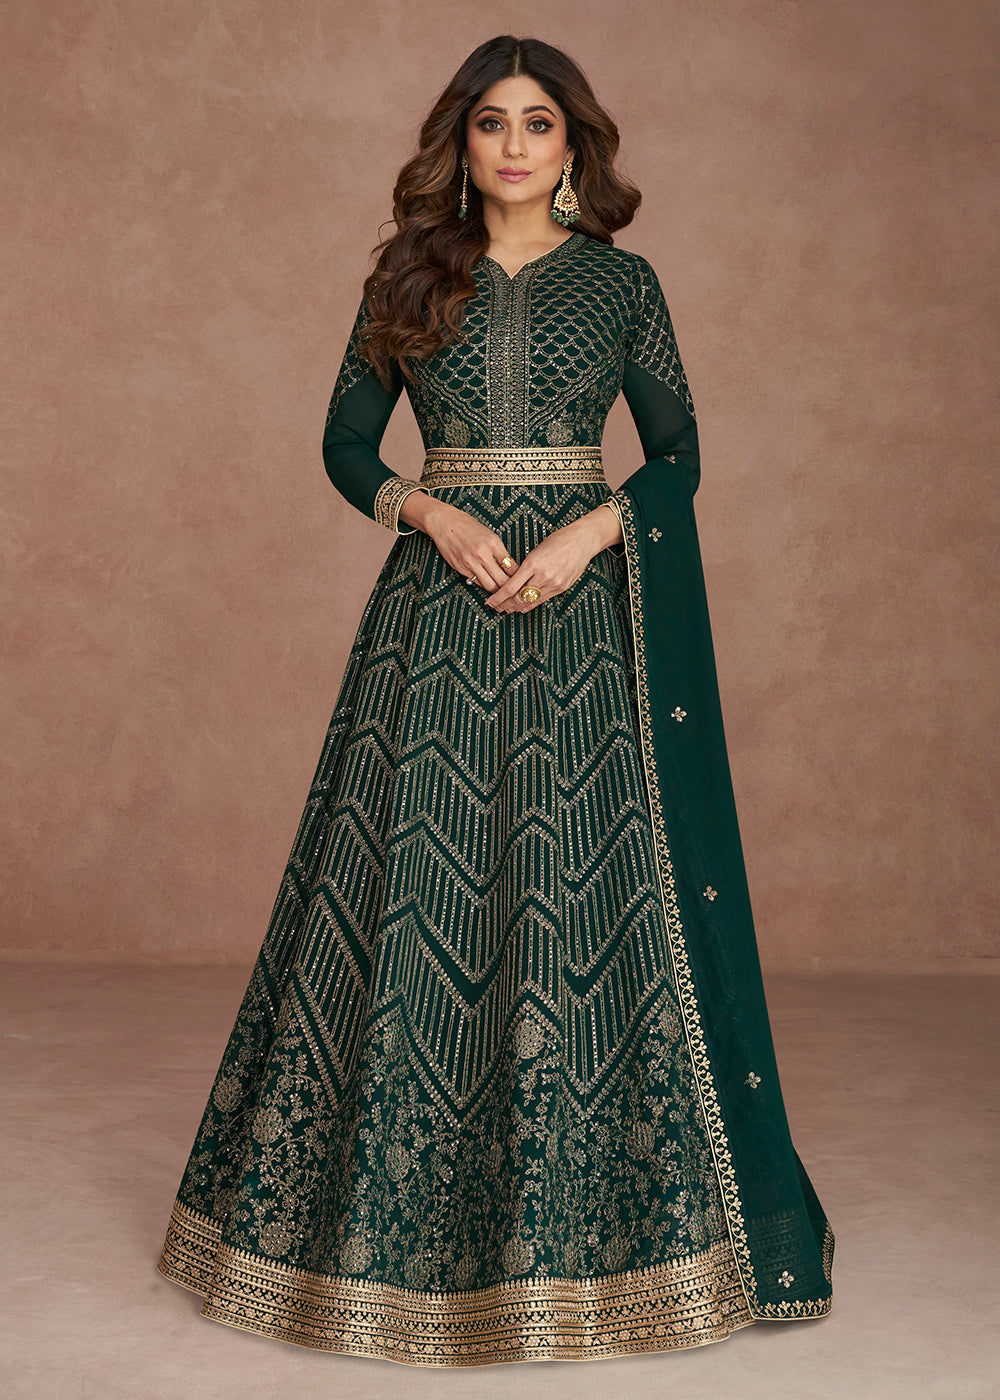 Buy Now Sequined Embroidered Dark Green Shamita Shetty Anarkali Gown Online in USA, UK, Australia, New Zealand, Canada, Italy & Worldwide at Empress Clothing. 